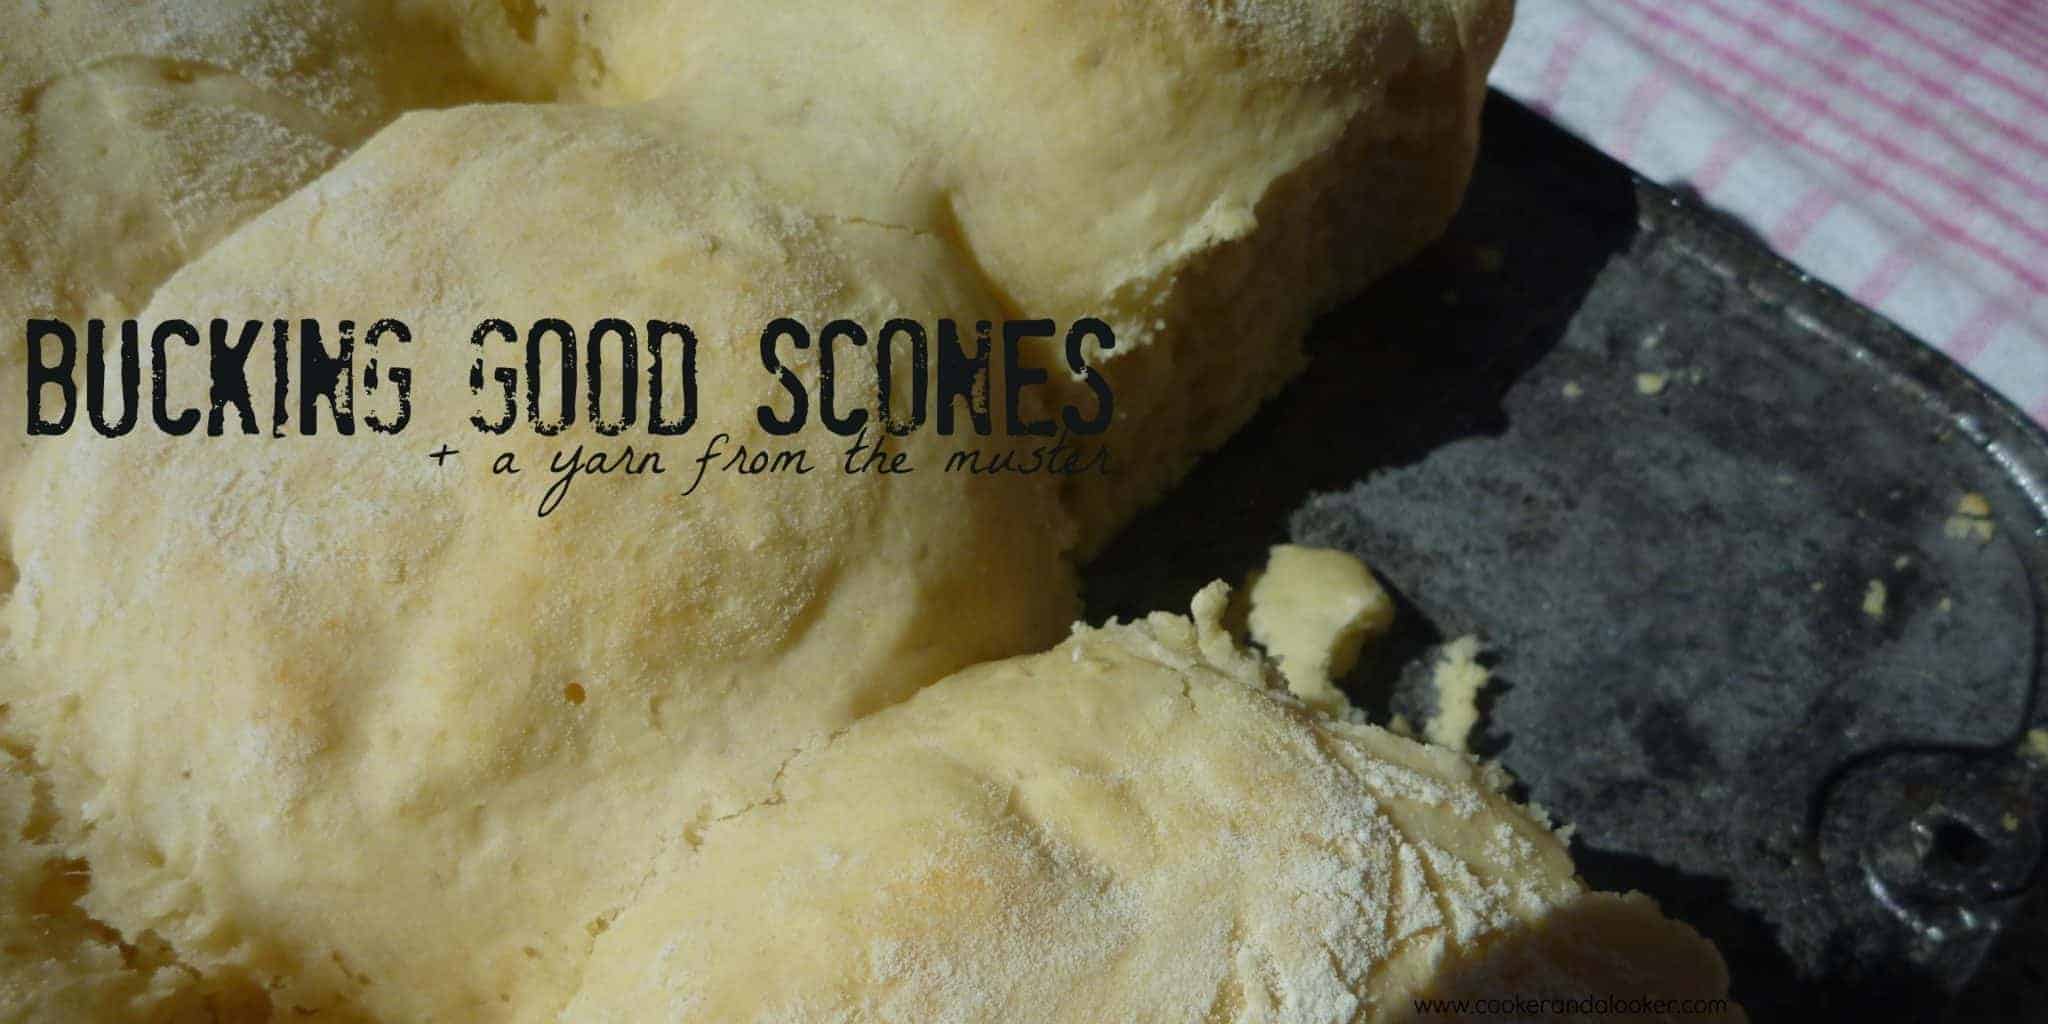 bucking good scones - Cooker and a Looker